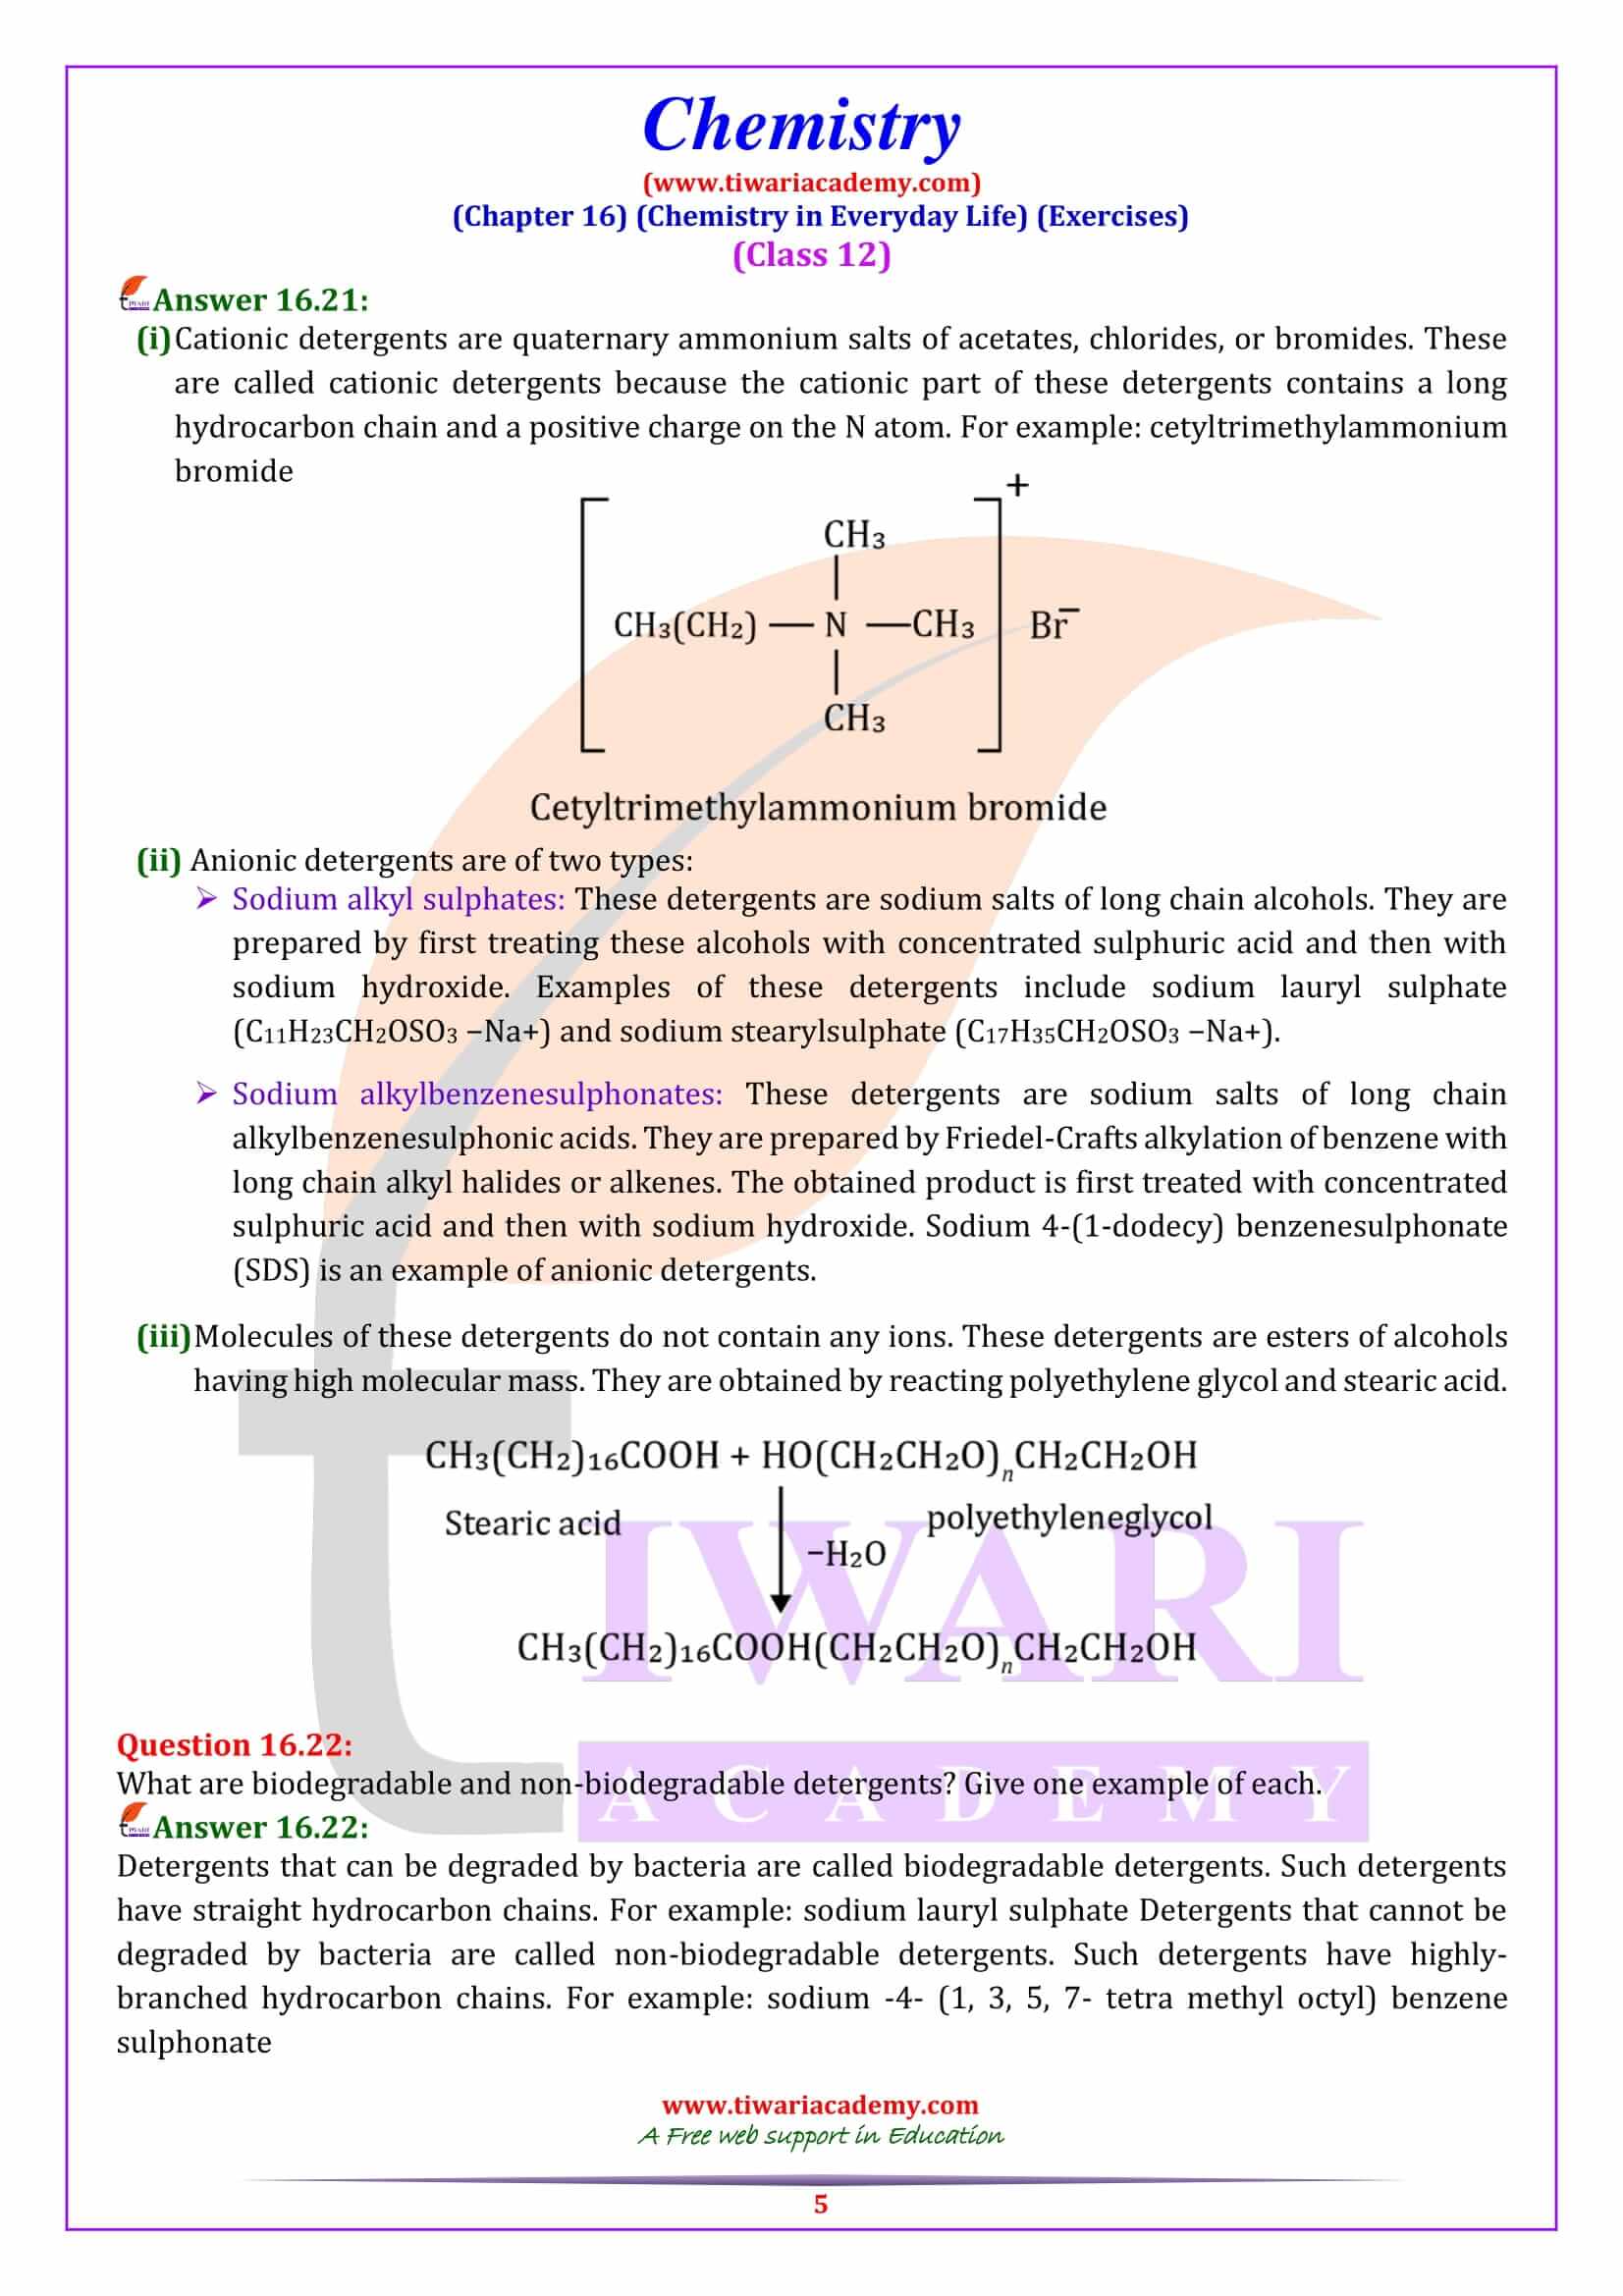 NCERT Solutions for Class 12 Chemistry Chapter 16 Exercises